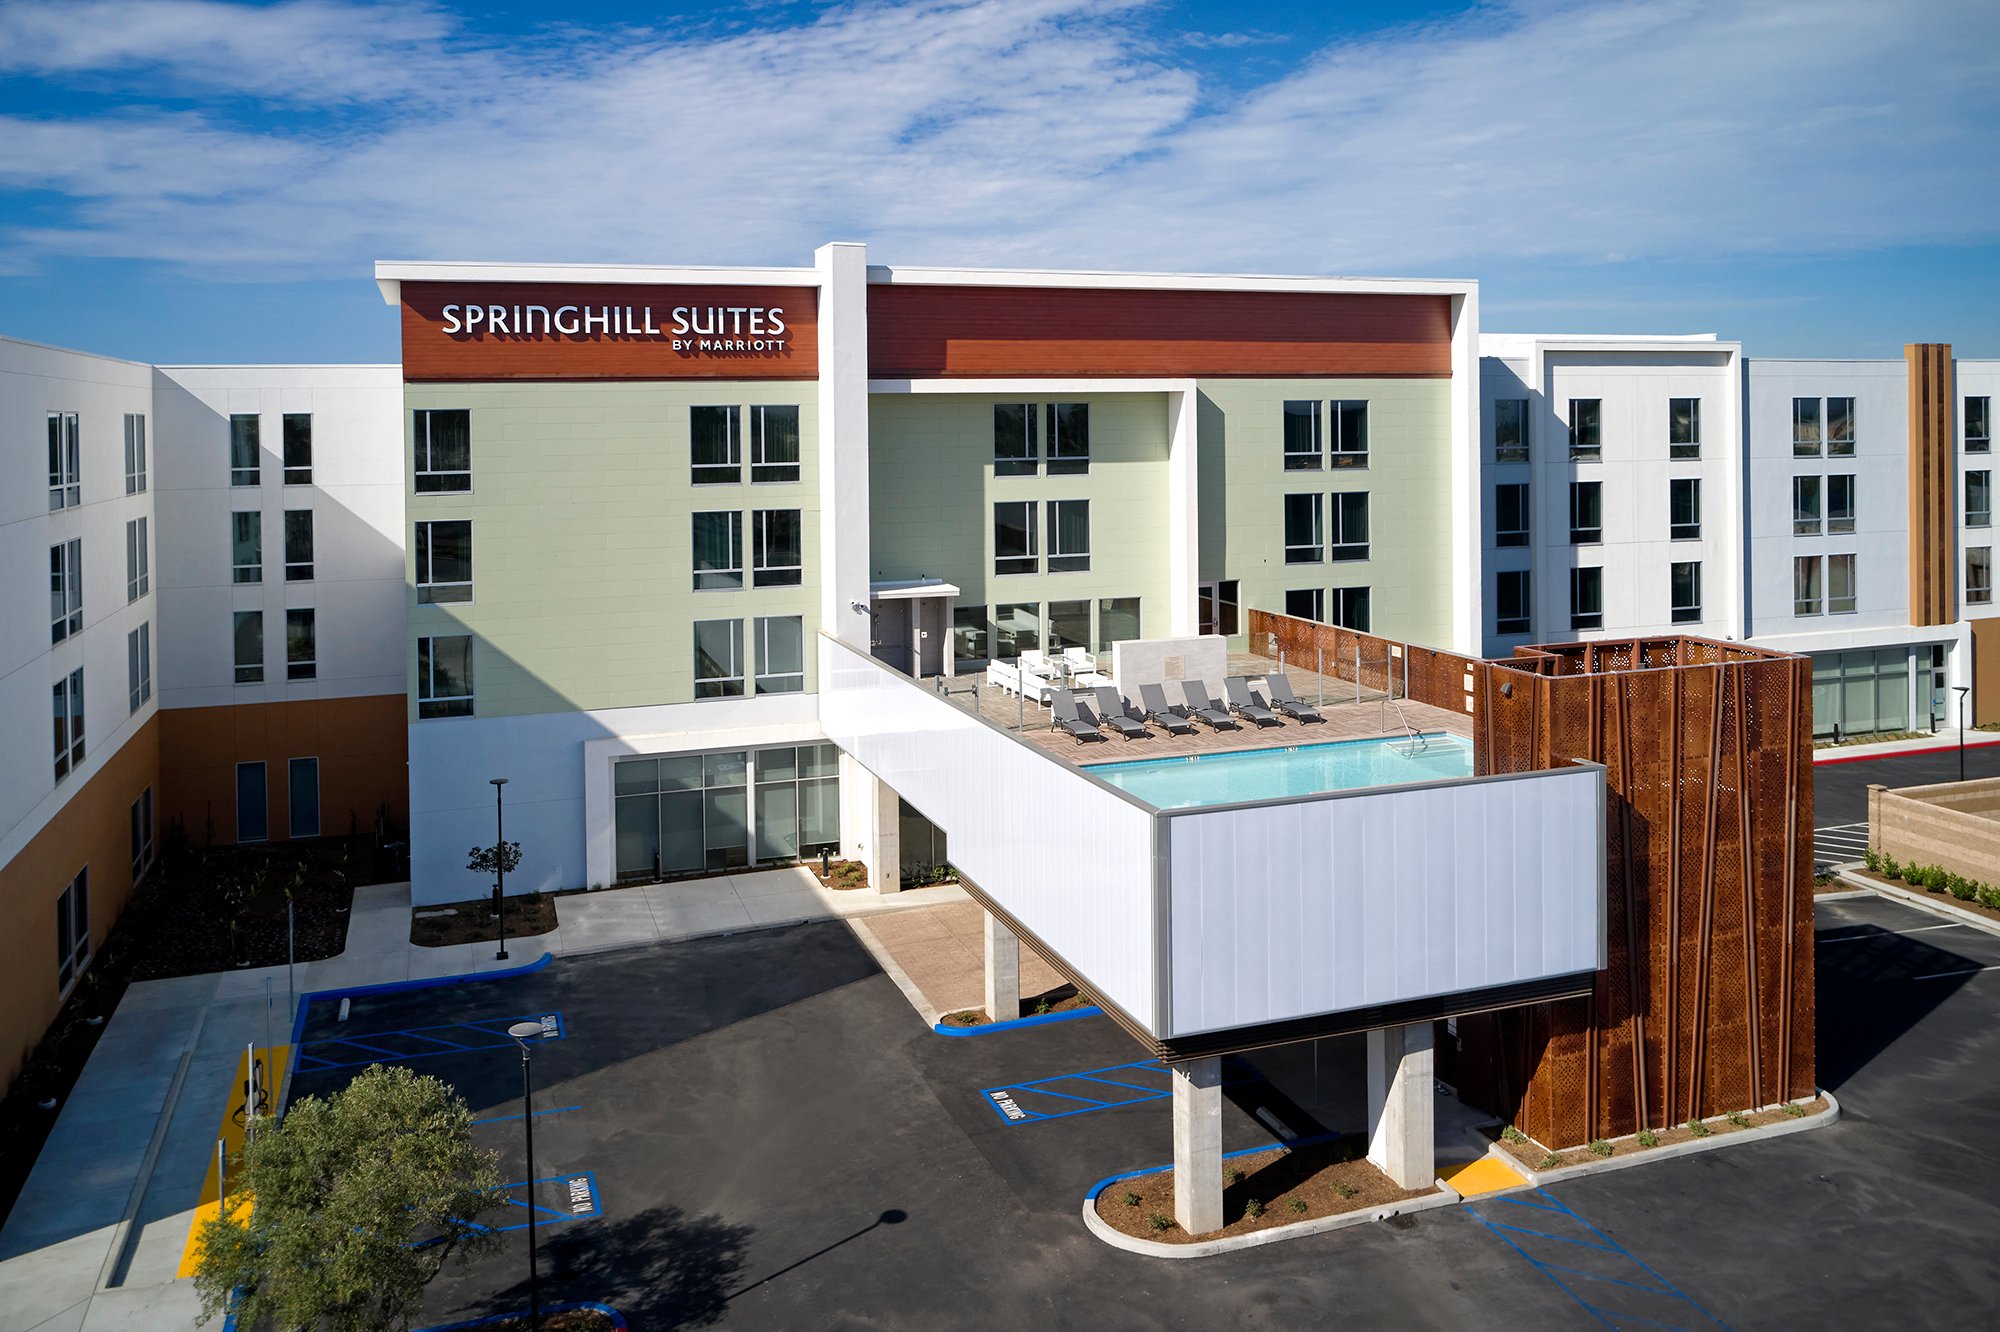 Springhill Suites Downey California